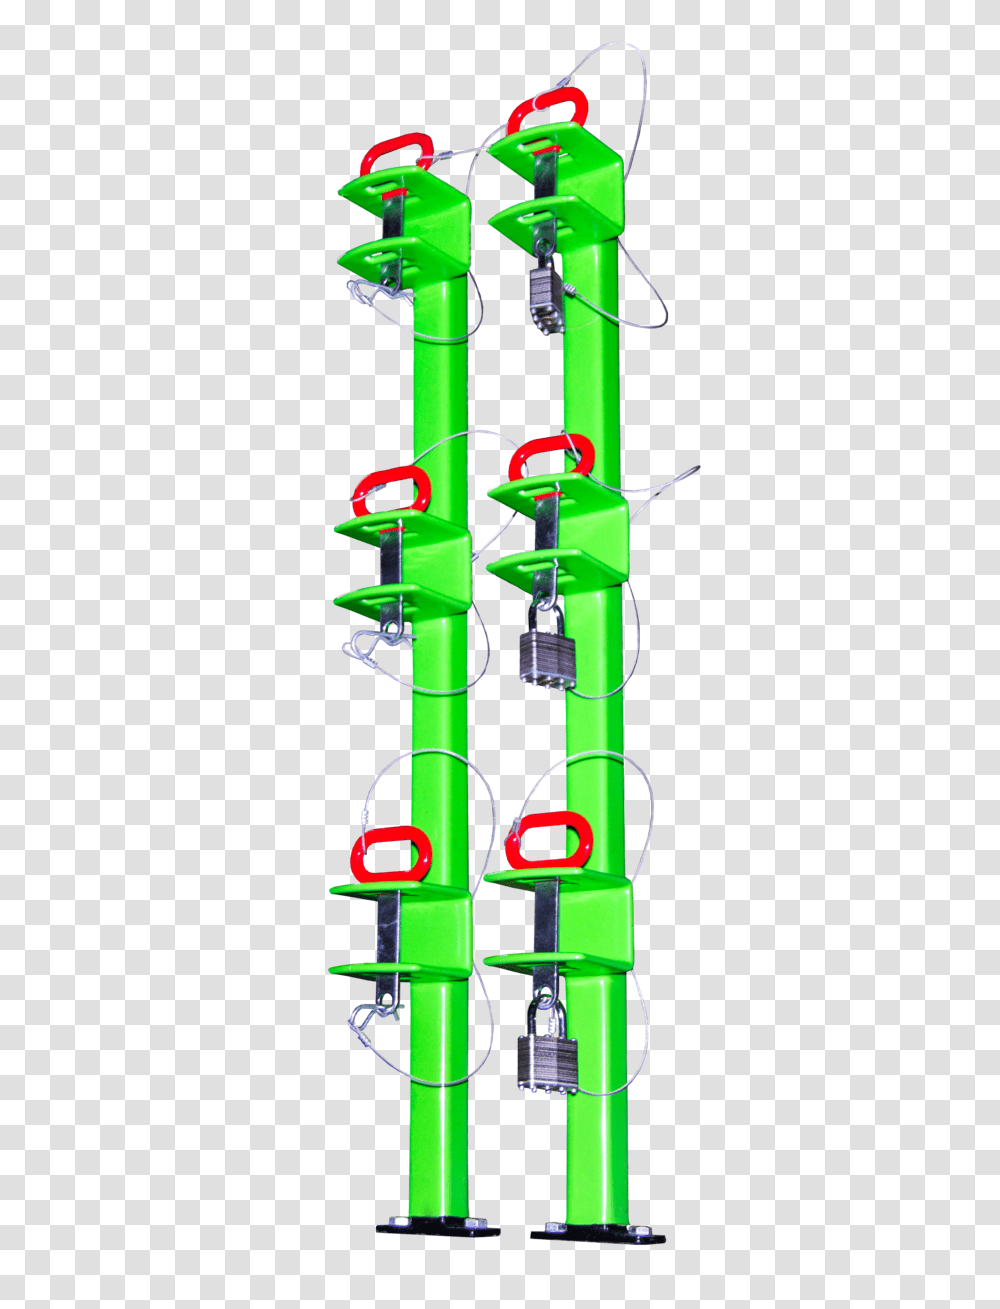 All Tagged Weed Eater Rack, Light, Toy, Neon Transparent Png